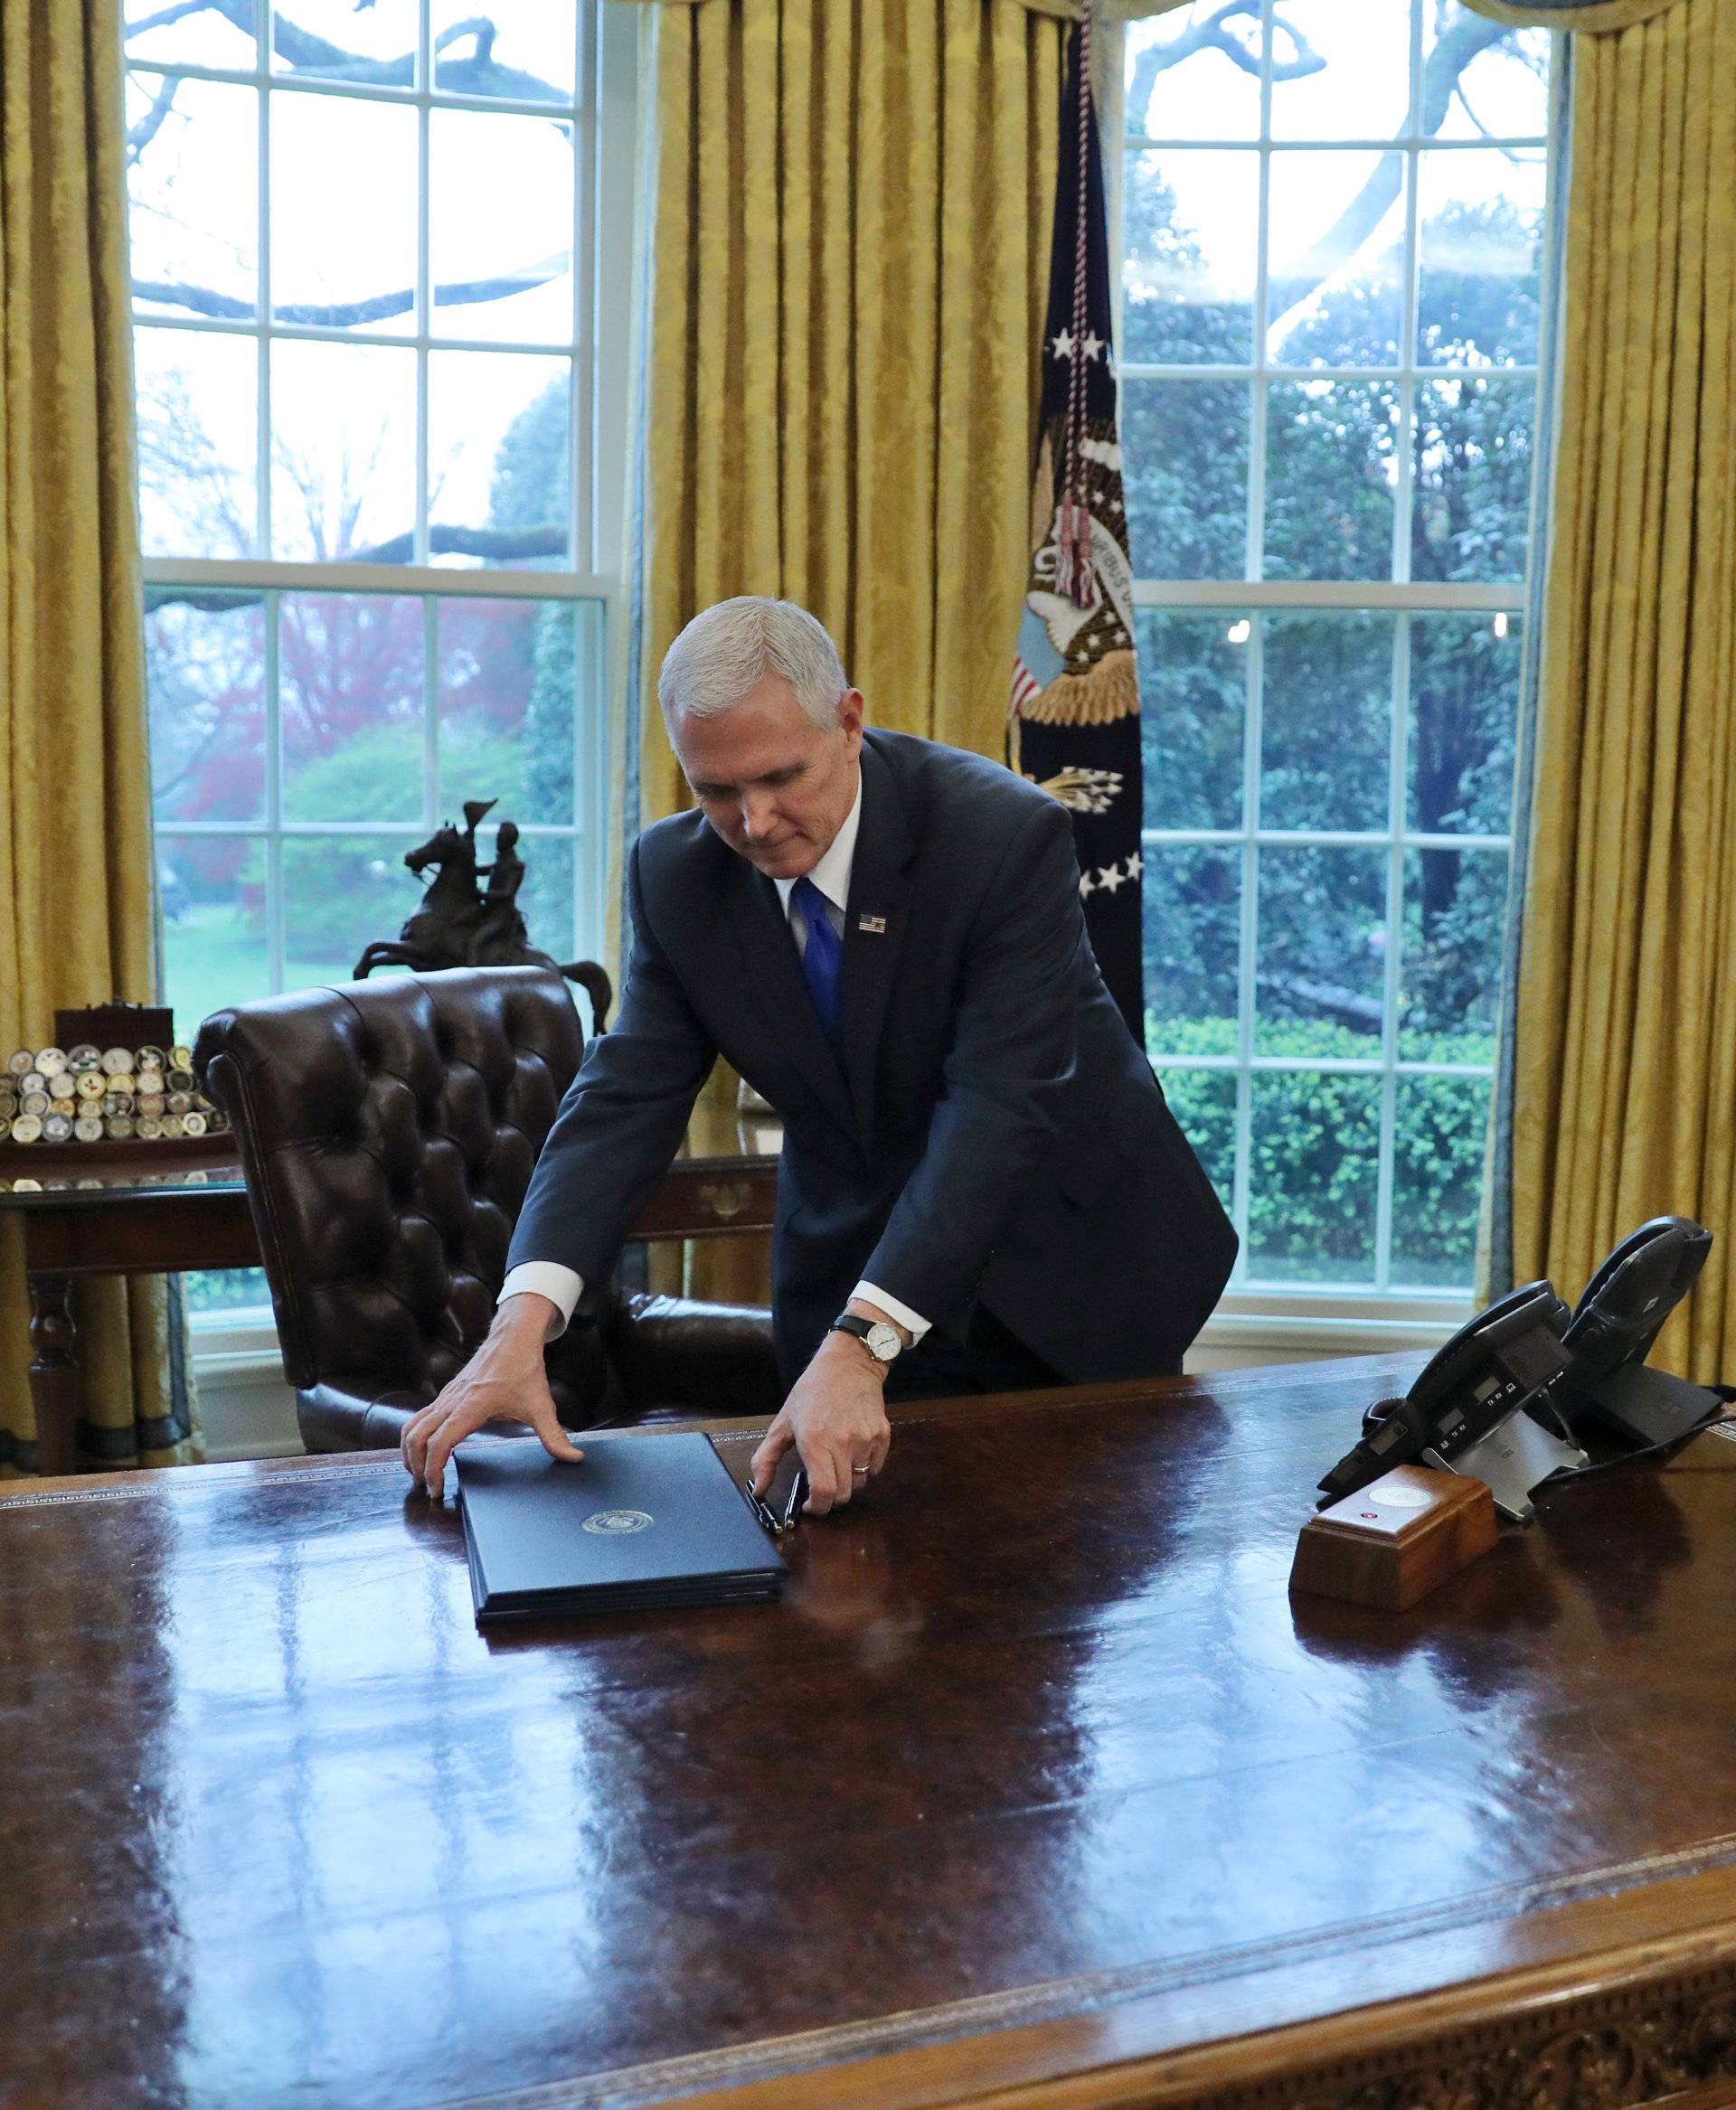 Vice President Mike Pence holds two executive orders on trade scheduled to be signed by U.S. President Donald Trump during a schedule signing ceremony at the Oval Office of the White House in Washington, U.S.